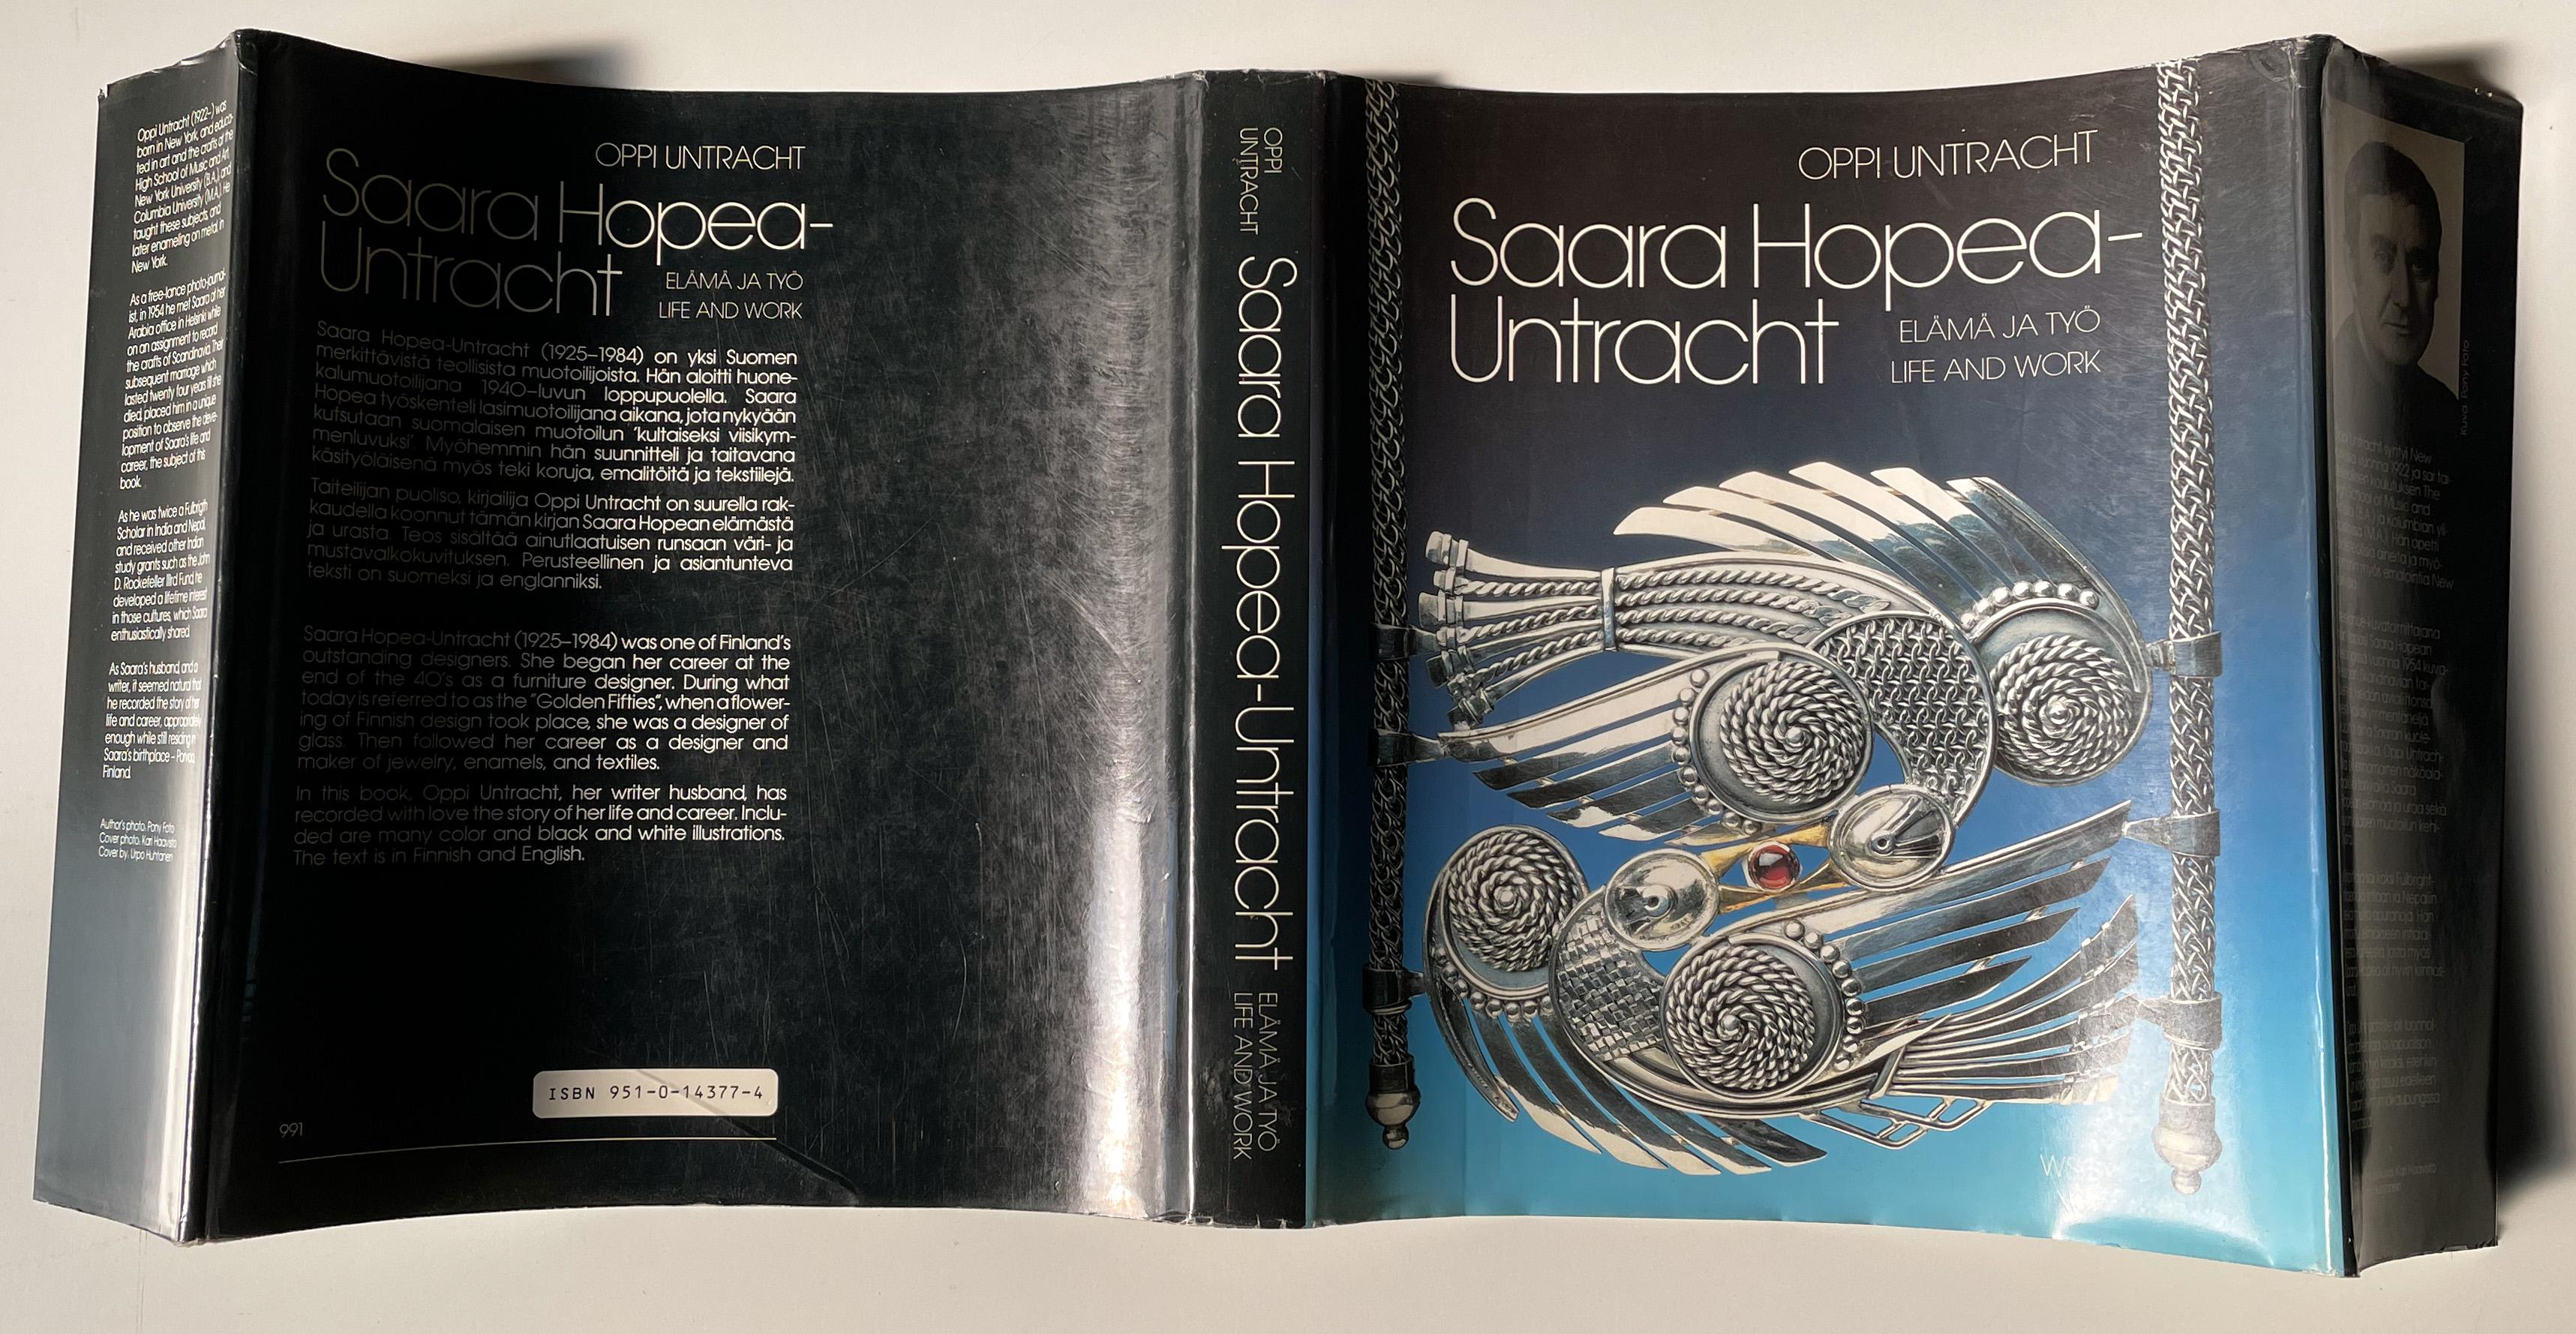 Monograph on renowned and prolific mid-century Finnish designer Saara Hopea-Untracht, written by her husband, the American metalsmith, educator, and writer Oppi Untracht. Published in 1988 by Werner Soderstrom Osakeyhtio. Small 4to (9